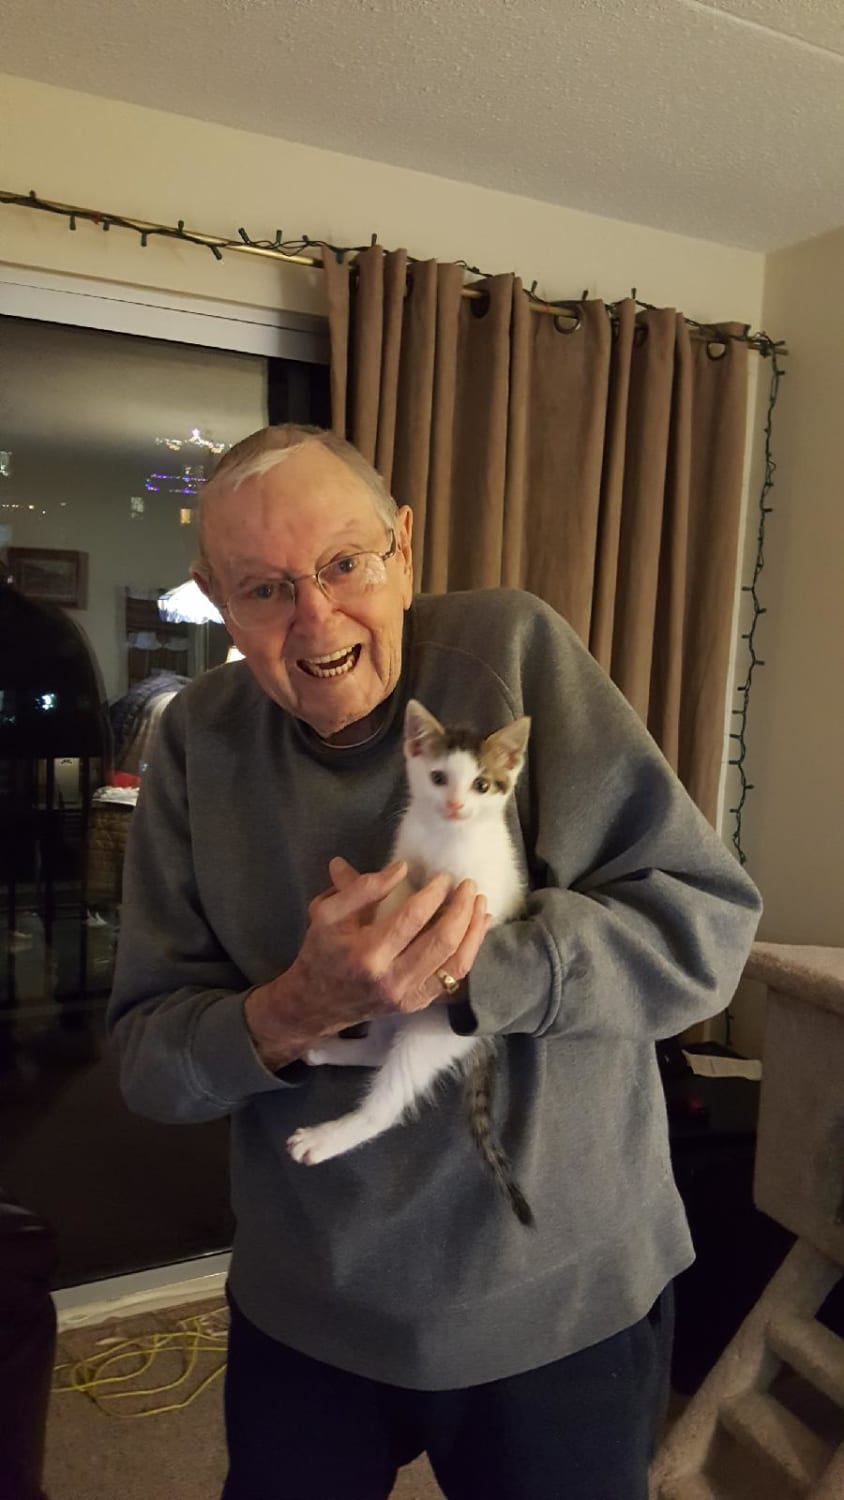 My Grandpa's cat passed away early December. He was crushed and didn't want to insensitively replaced her, but was so lonely he let my mom help him find a new kitten after a couple weeks. This is the picture she sent me.